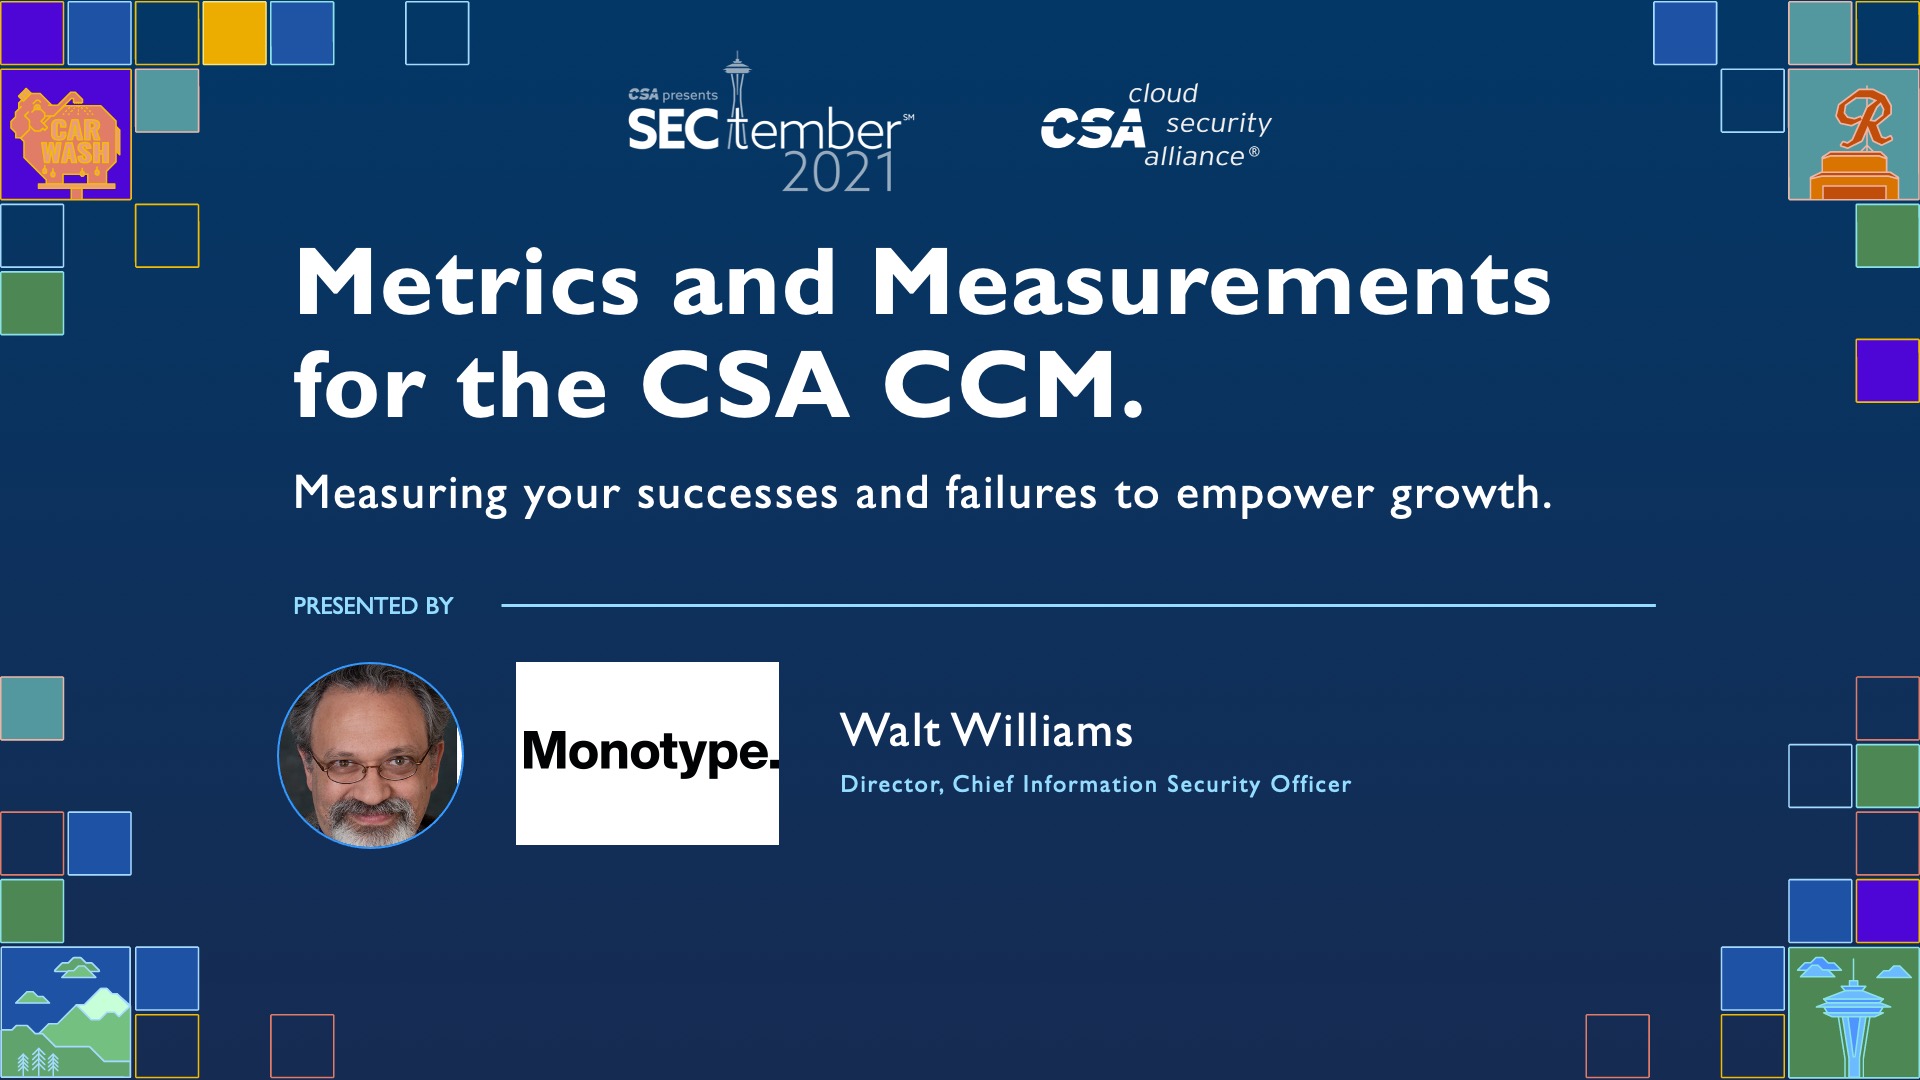 Metrics and Measurements for the CSA CCM